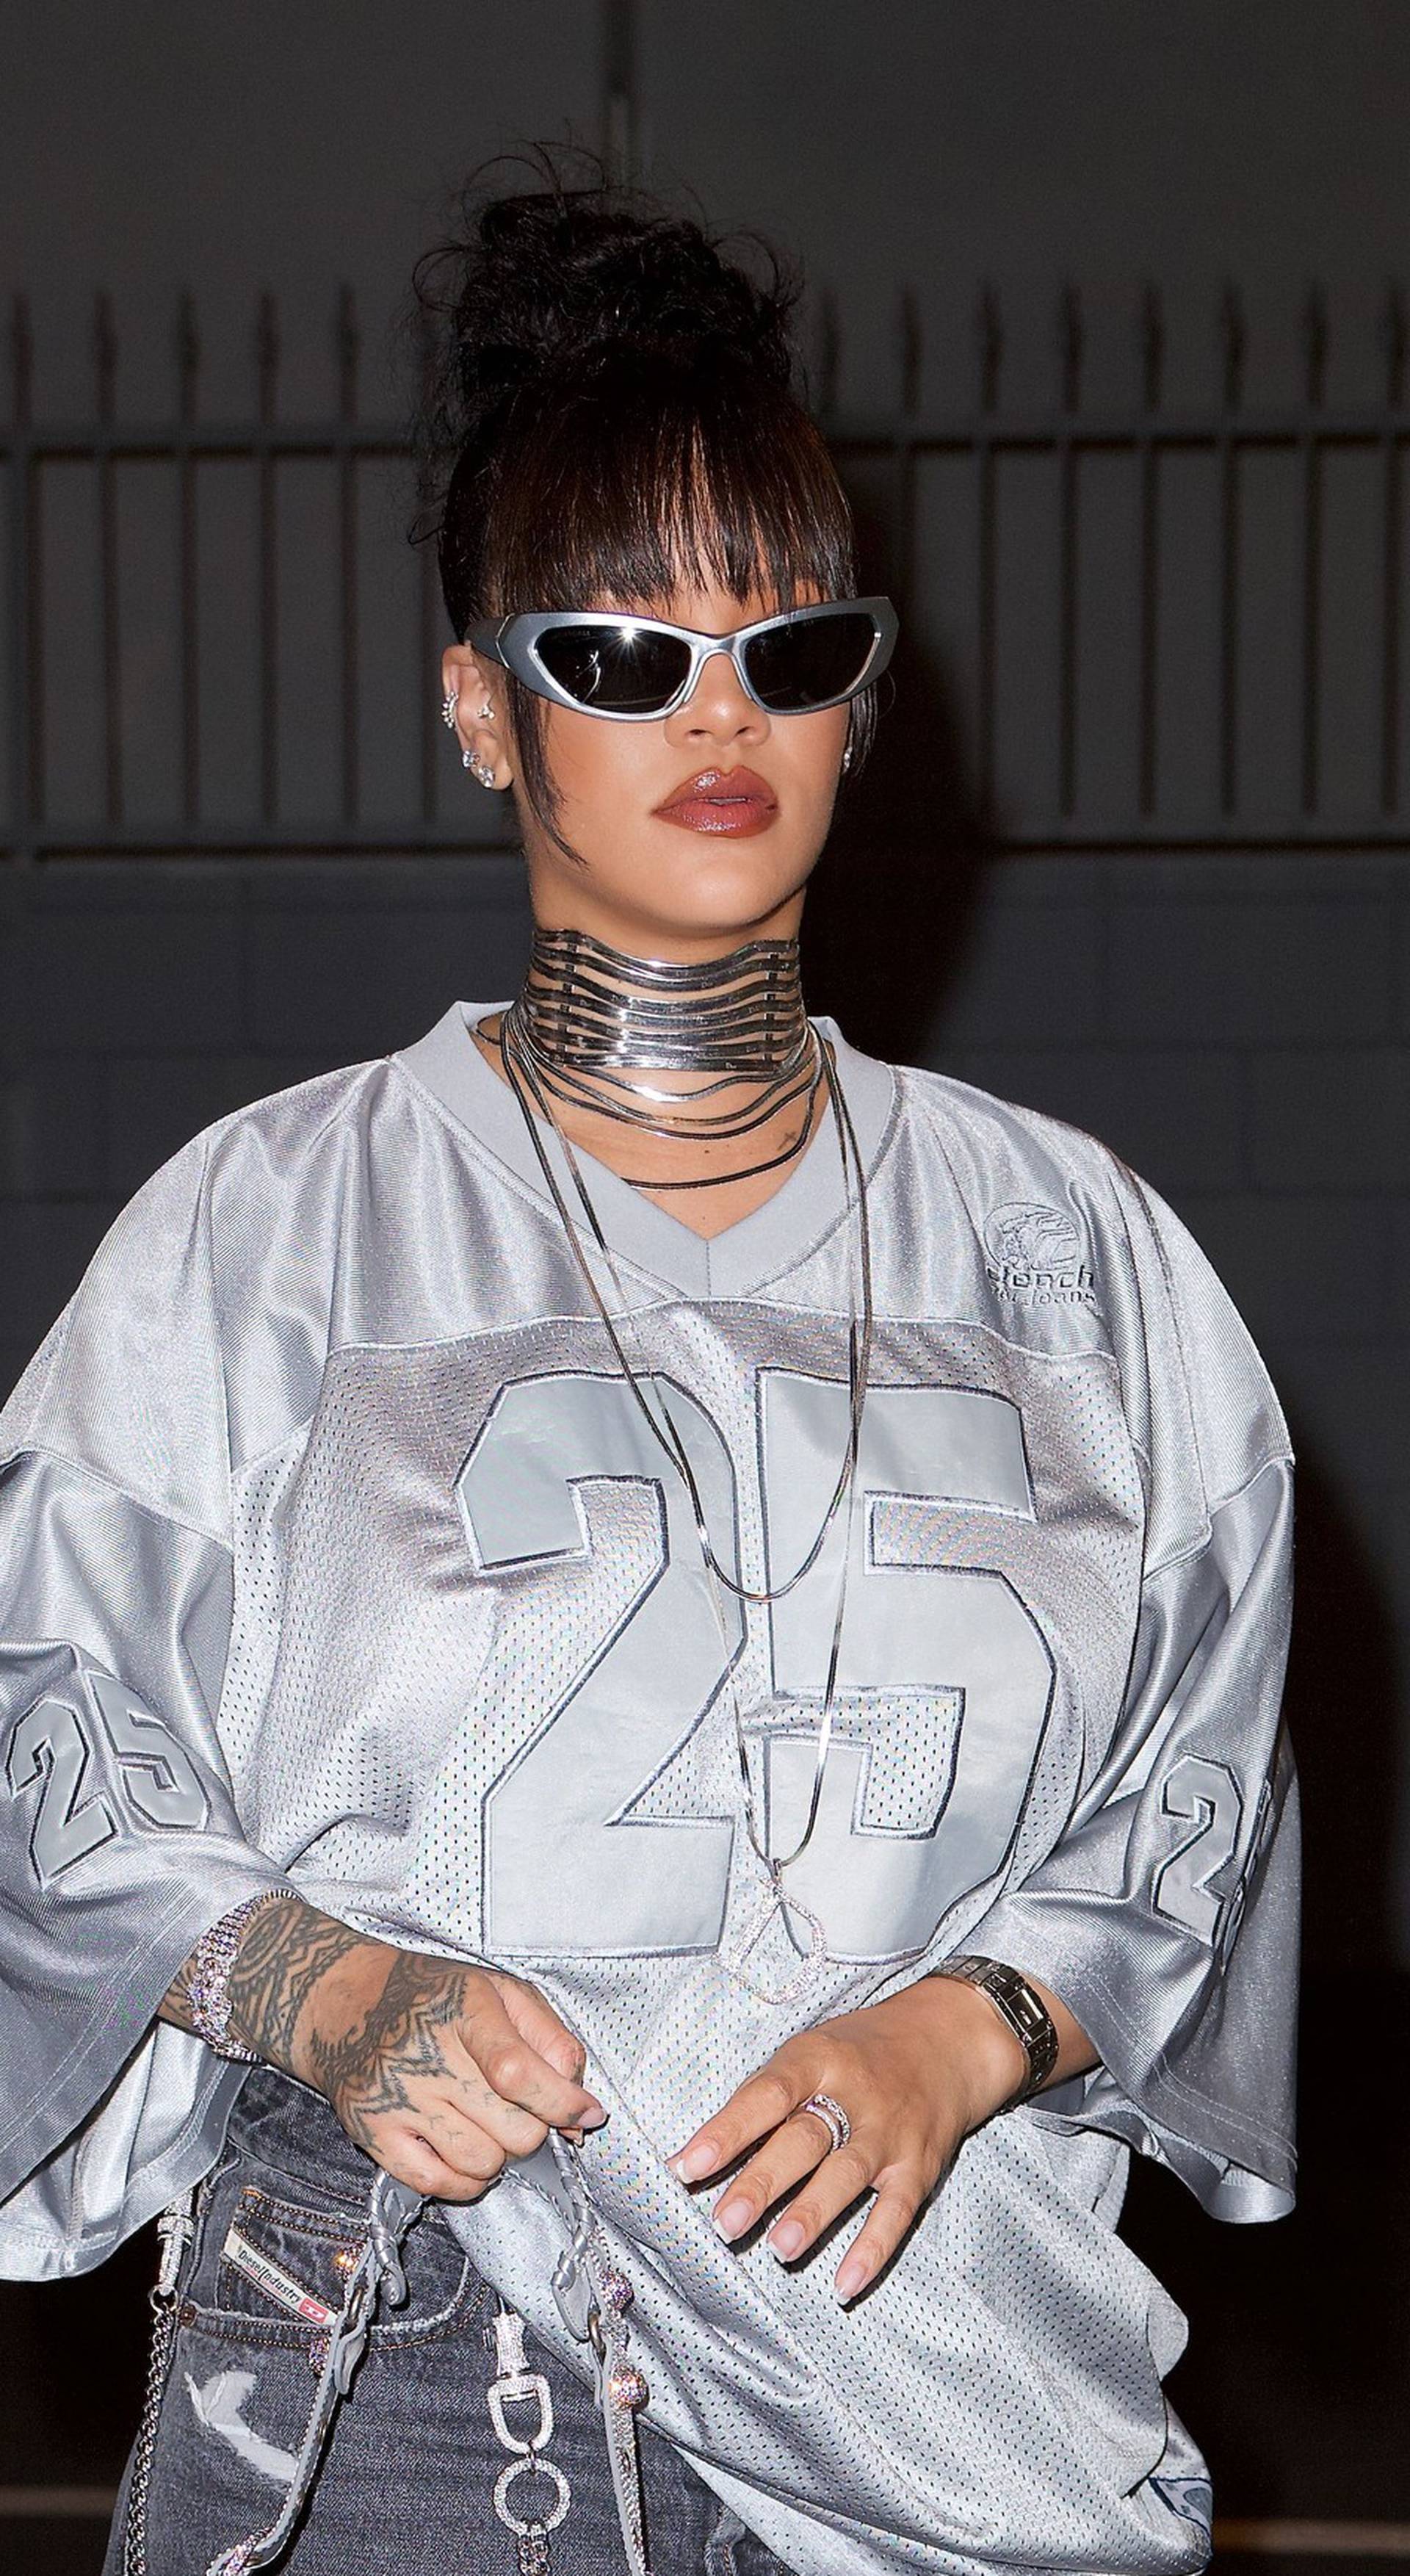 EXCLUSIVE - Rihanna Scores a Touchdown in Silver Football Jersey as She Hits the Studio to Prepare for Her Superbowl Performance, Los Angeles, California, USA - 09 Oct 2022